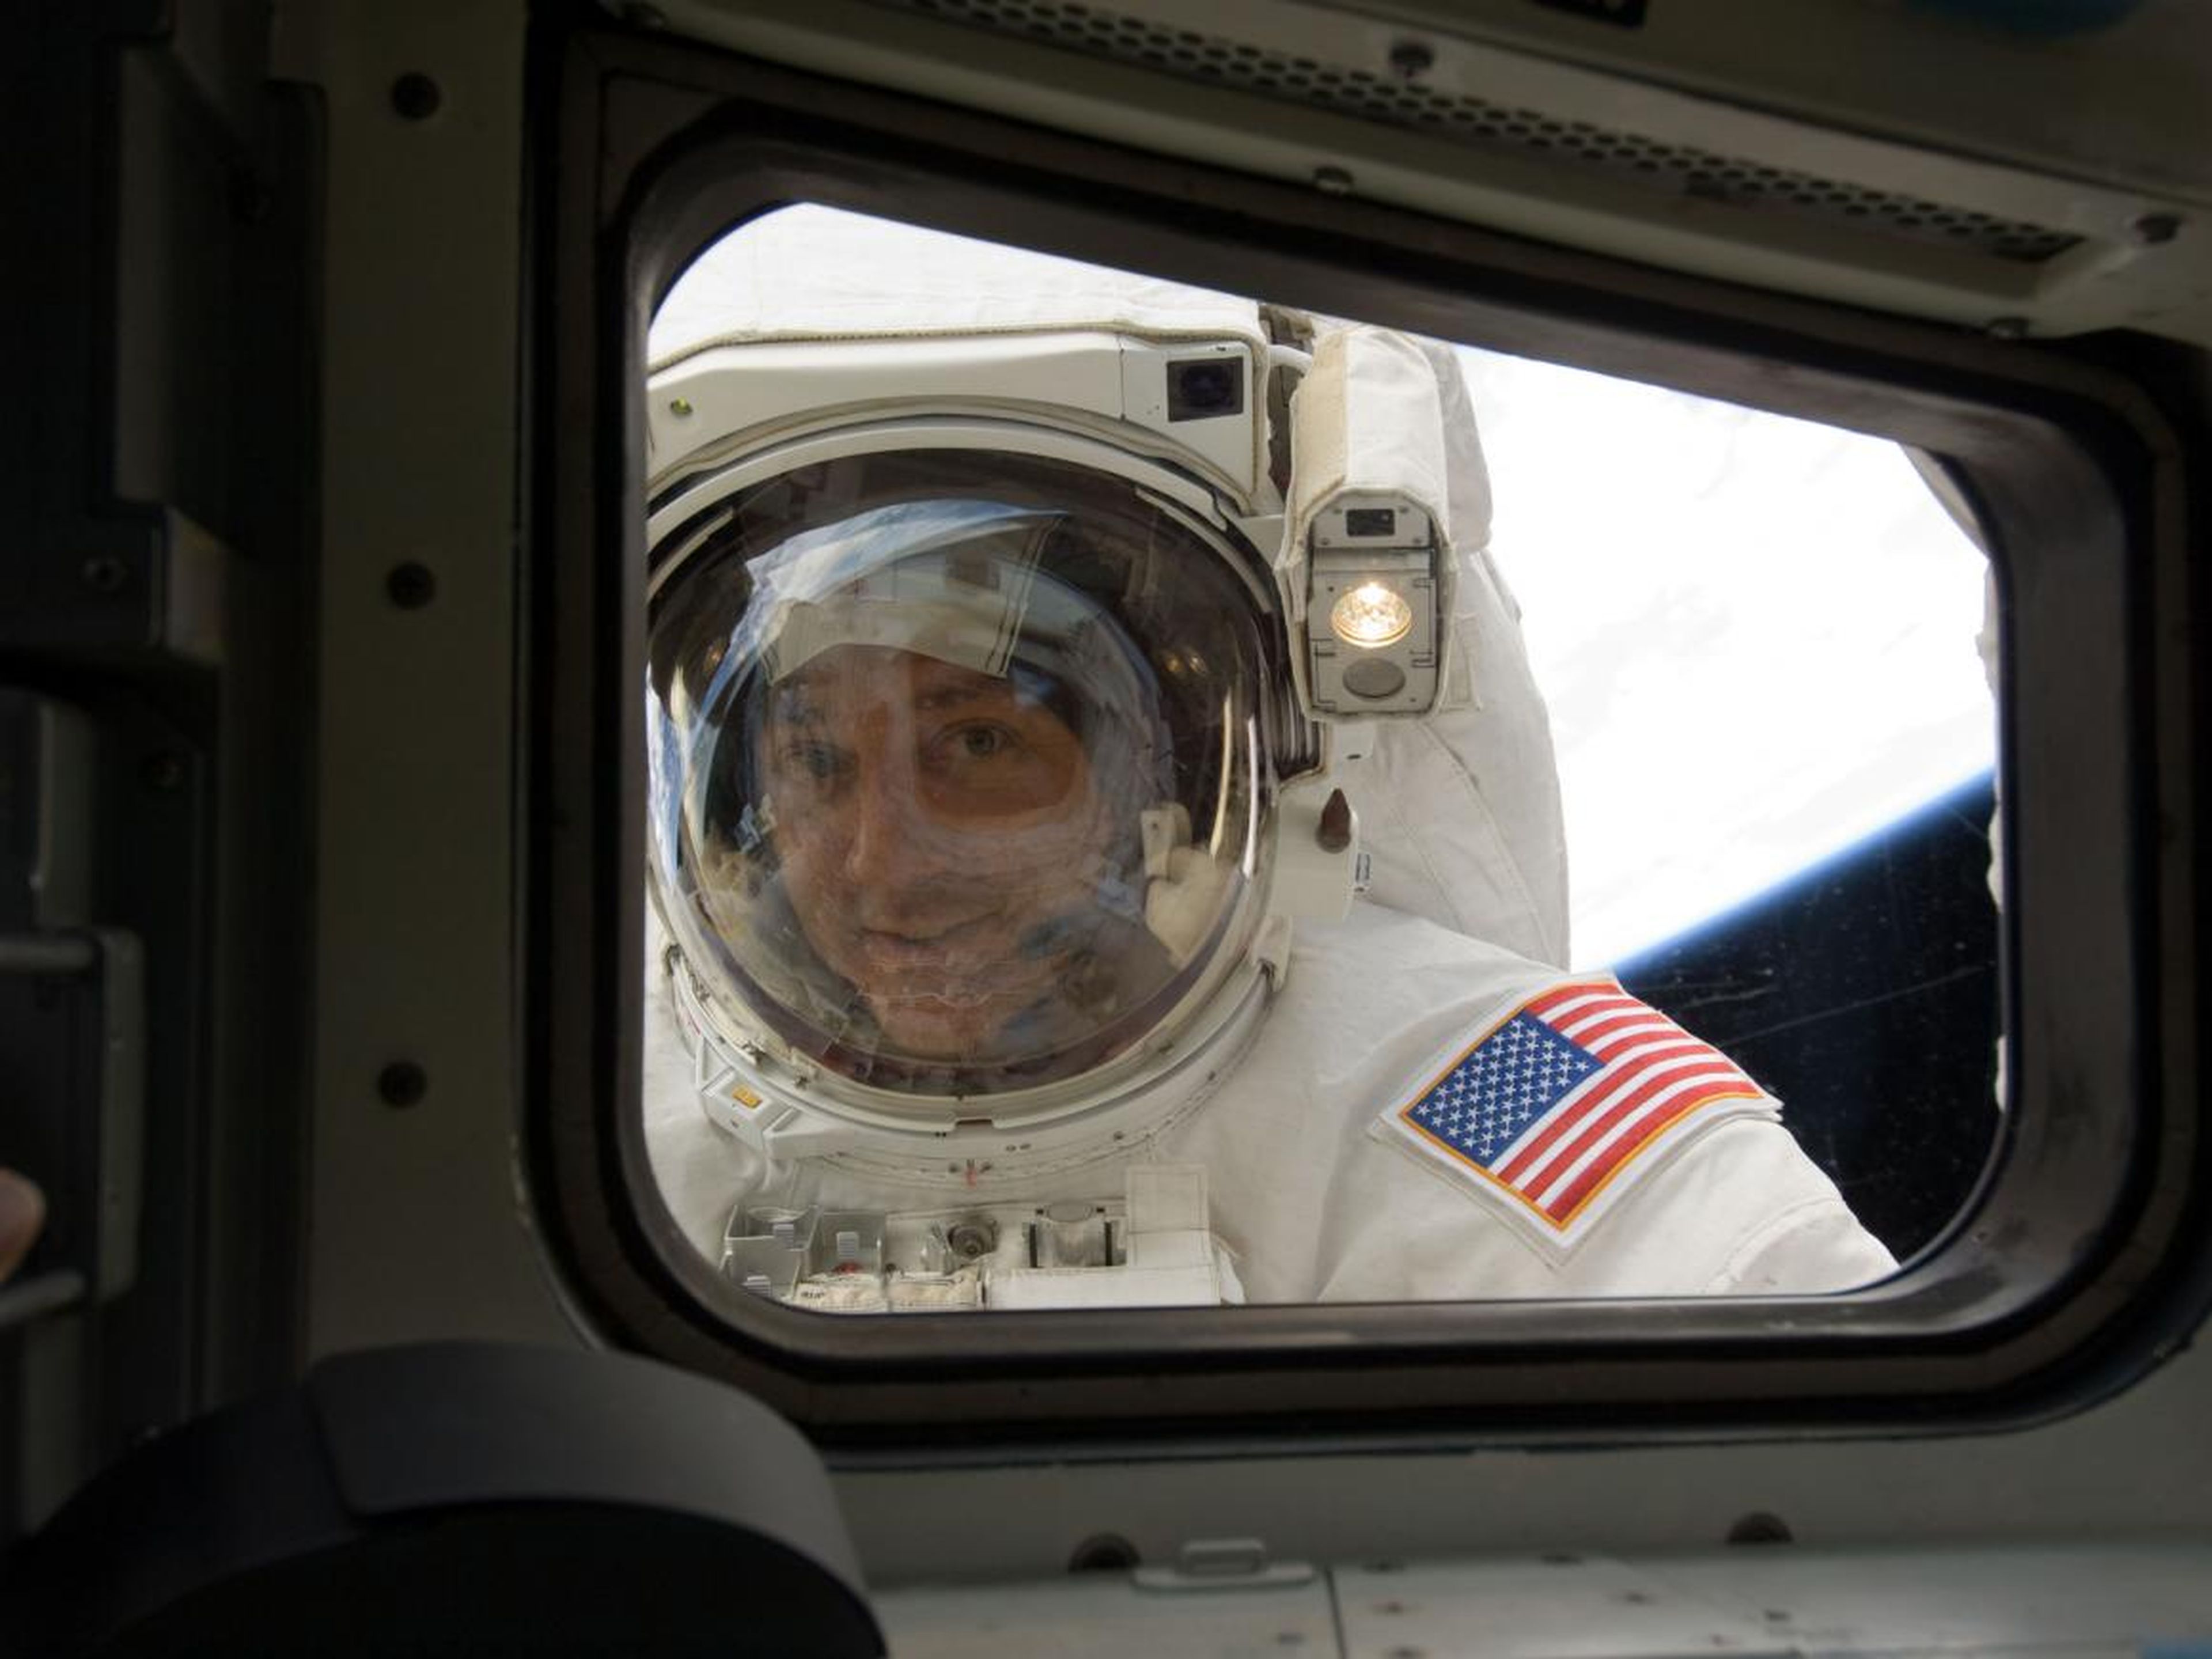 Massimino peers through the flight deck window while refurbishing and upgrading the Hubble Space Telescope in 2009.